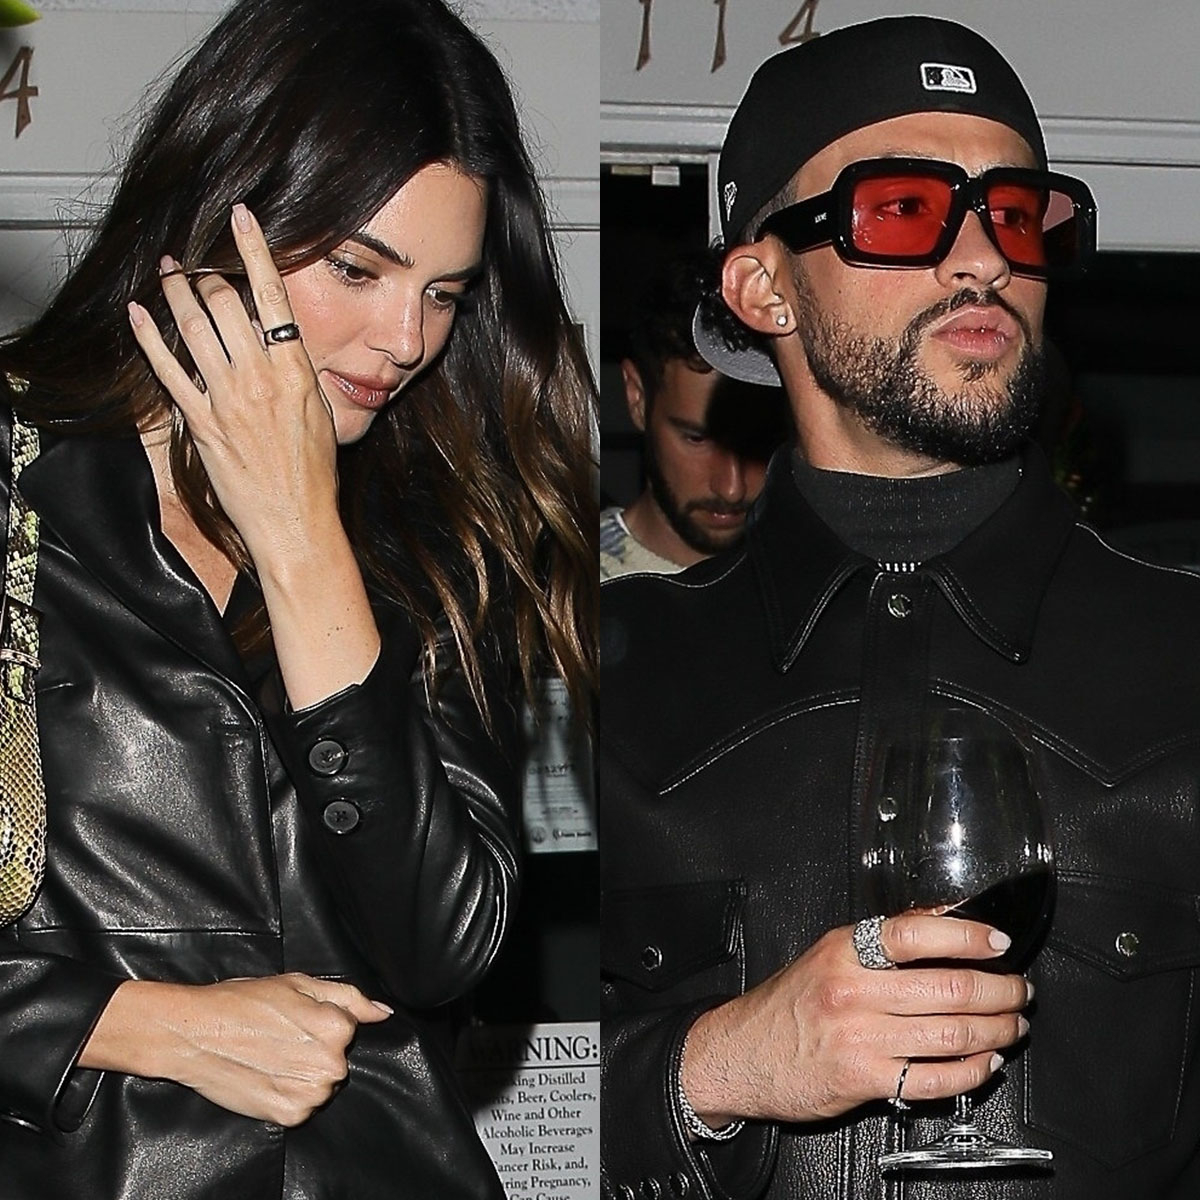 Kendall Jenner Rocks Sheer Ensemble for Date Night With Bad Bunny